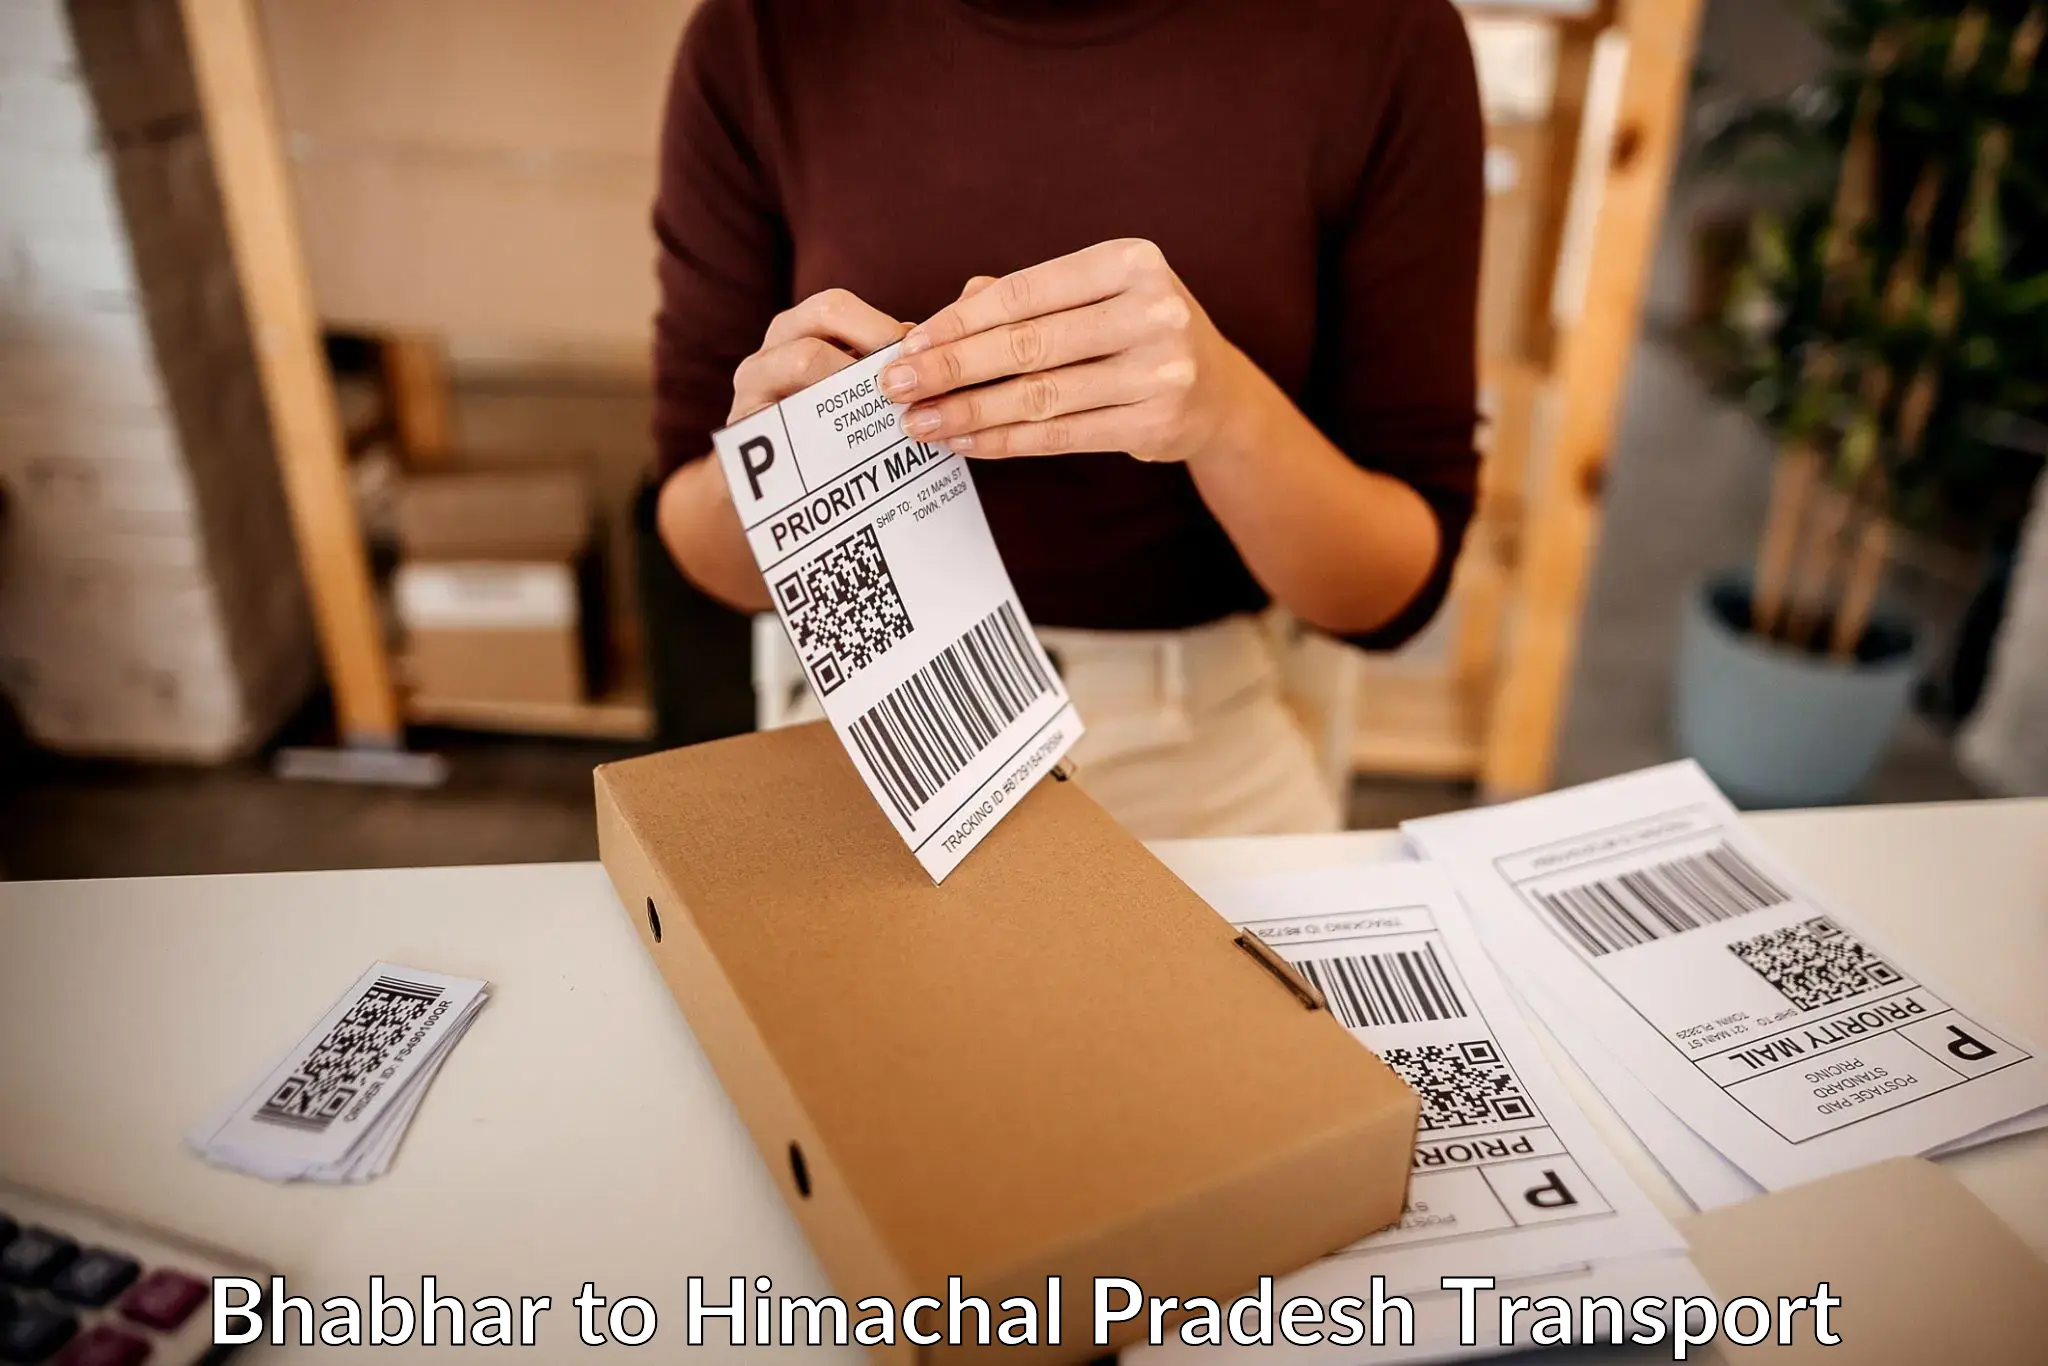 Goods delivery service in Bhabhar to Dharamshala